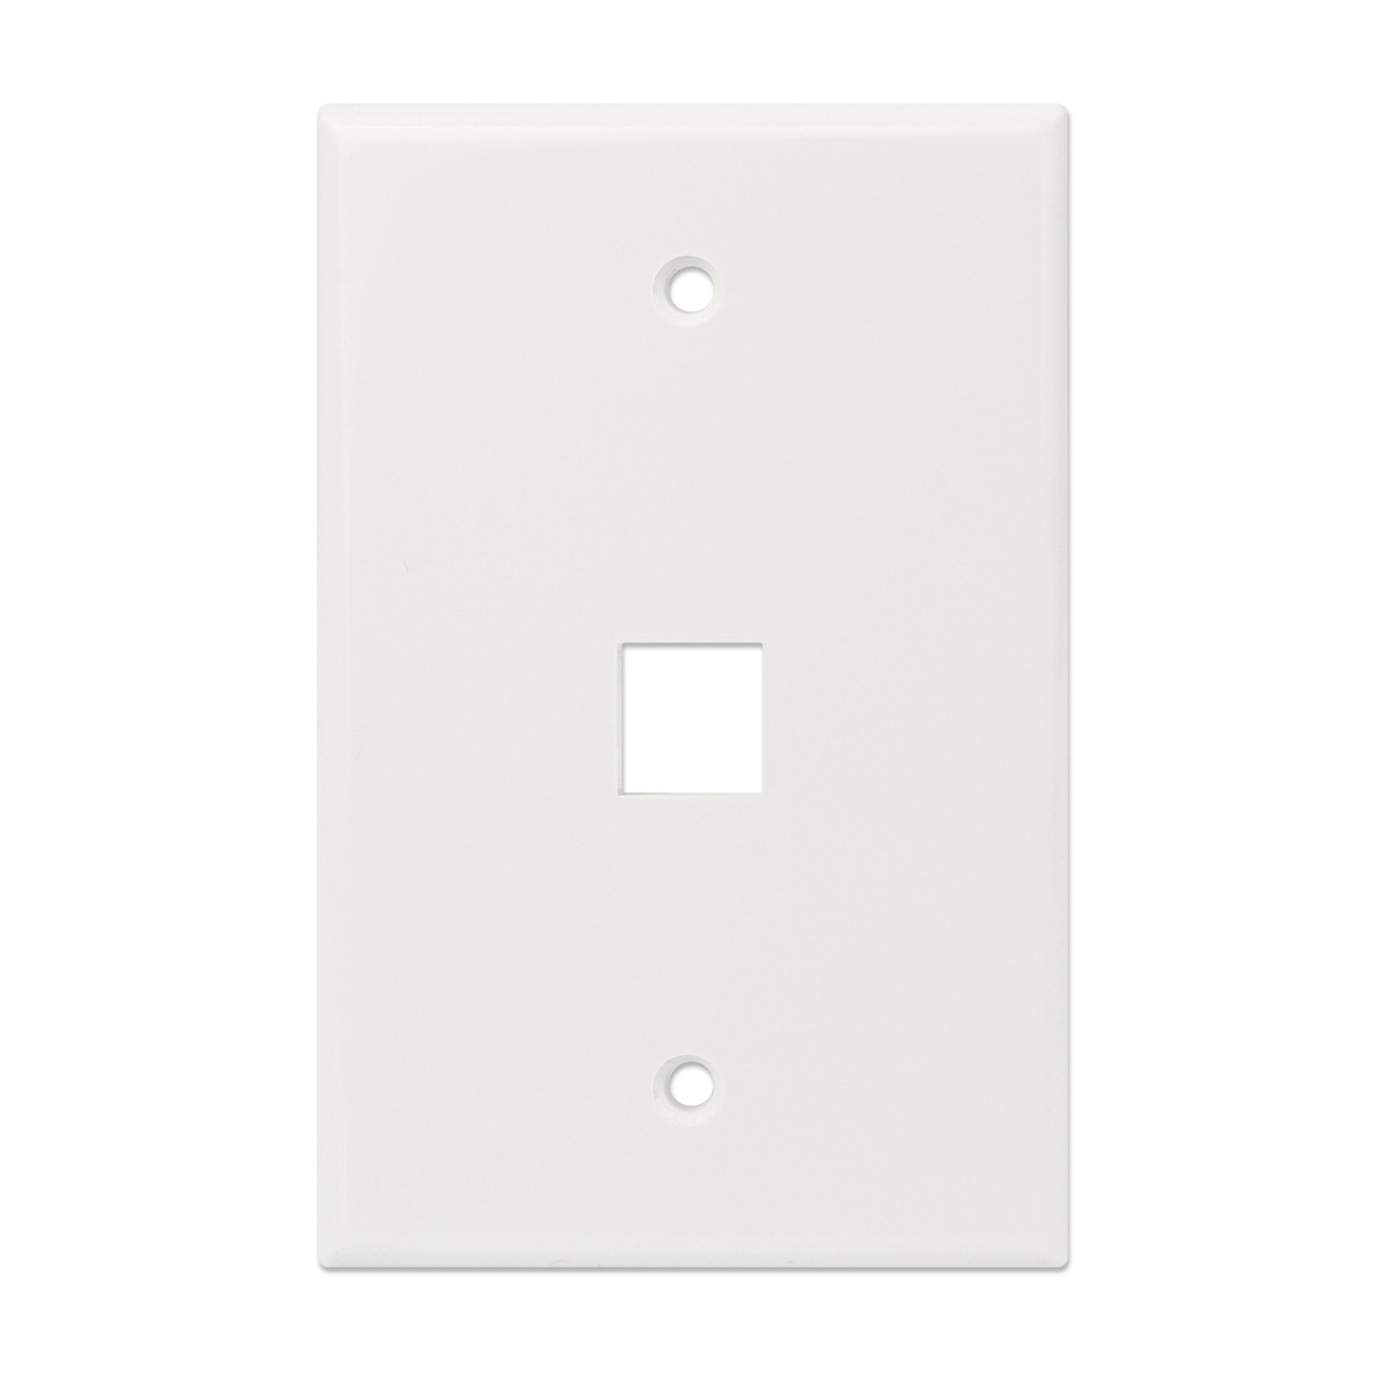 1-Outlet Oversized Keystone Wall Plate Image 4